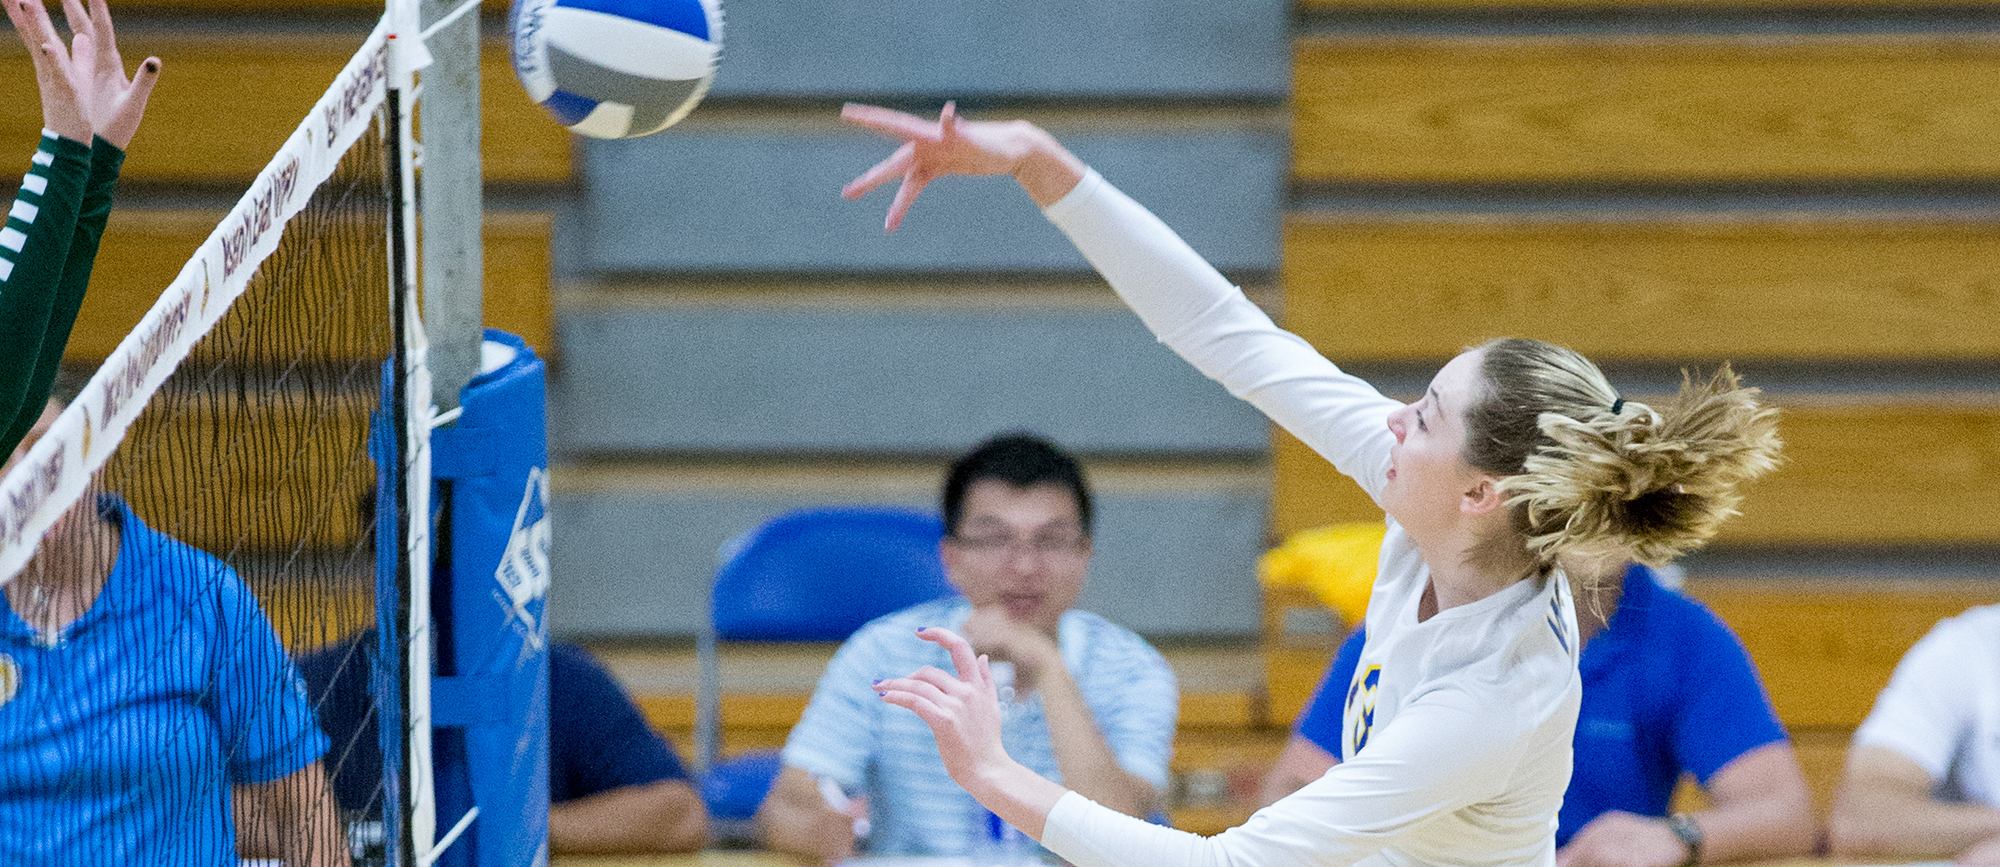 Freshman Abigail Bundy recorded a team-high seven kills in Wednesday's 3-0 loss at Endicott. (Photo by Chris Marion)